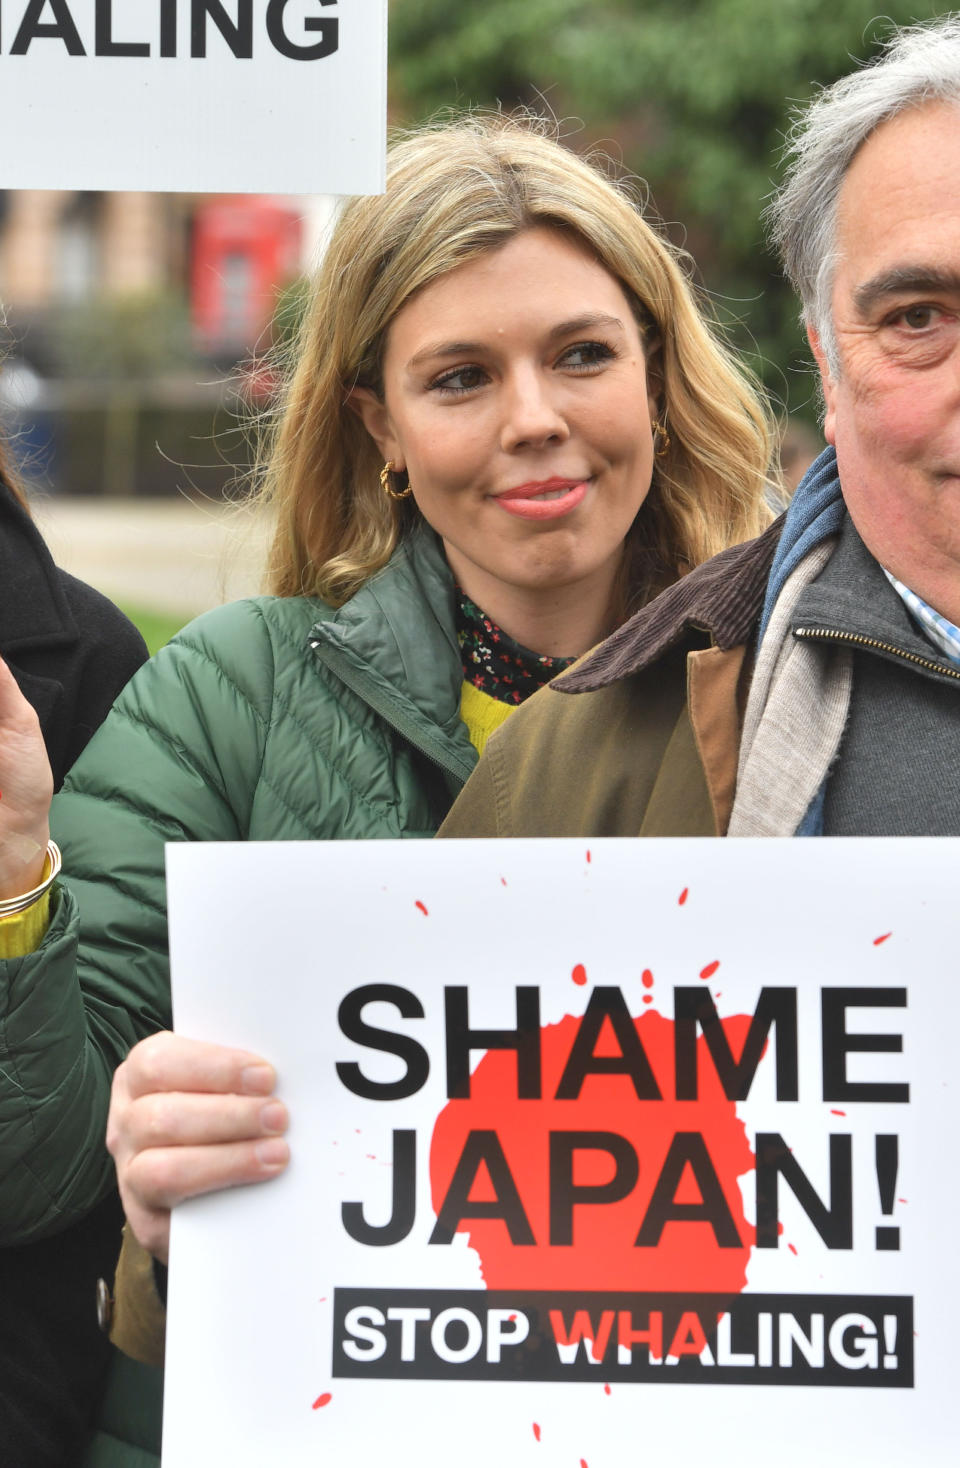 Activist Carrie Symonds takes part in an anti-whaling protest outside the Japanese Embassy in central London.